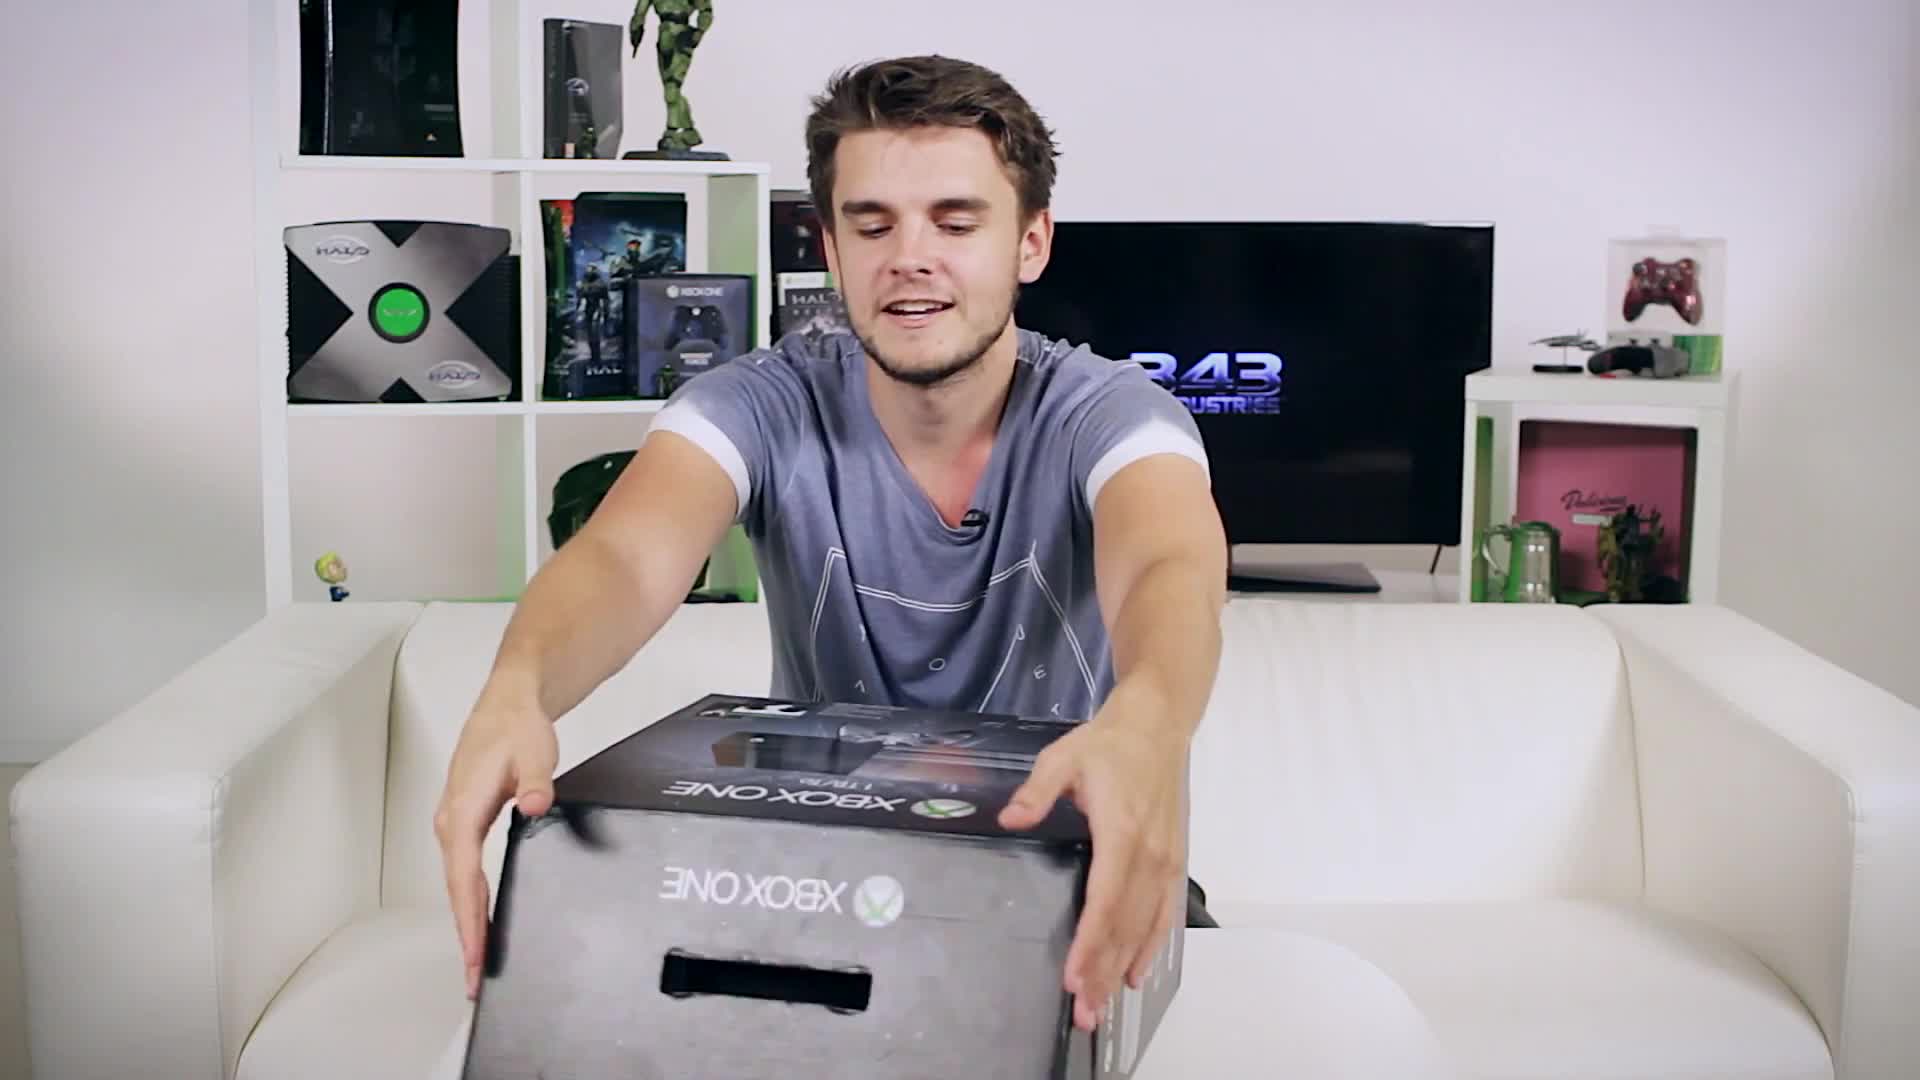 Halo Xbox One limited edition - unboxing